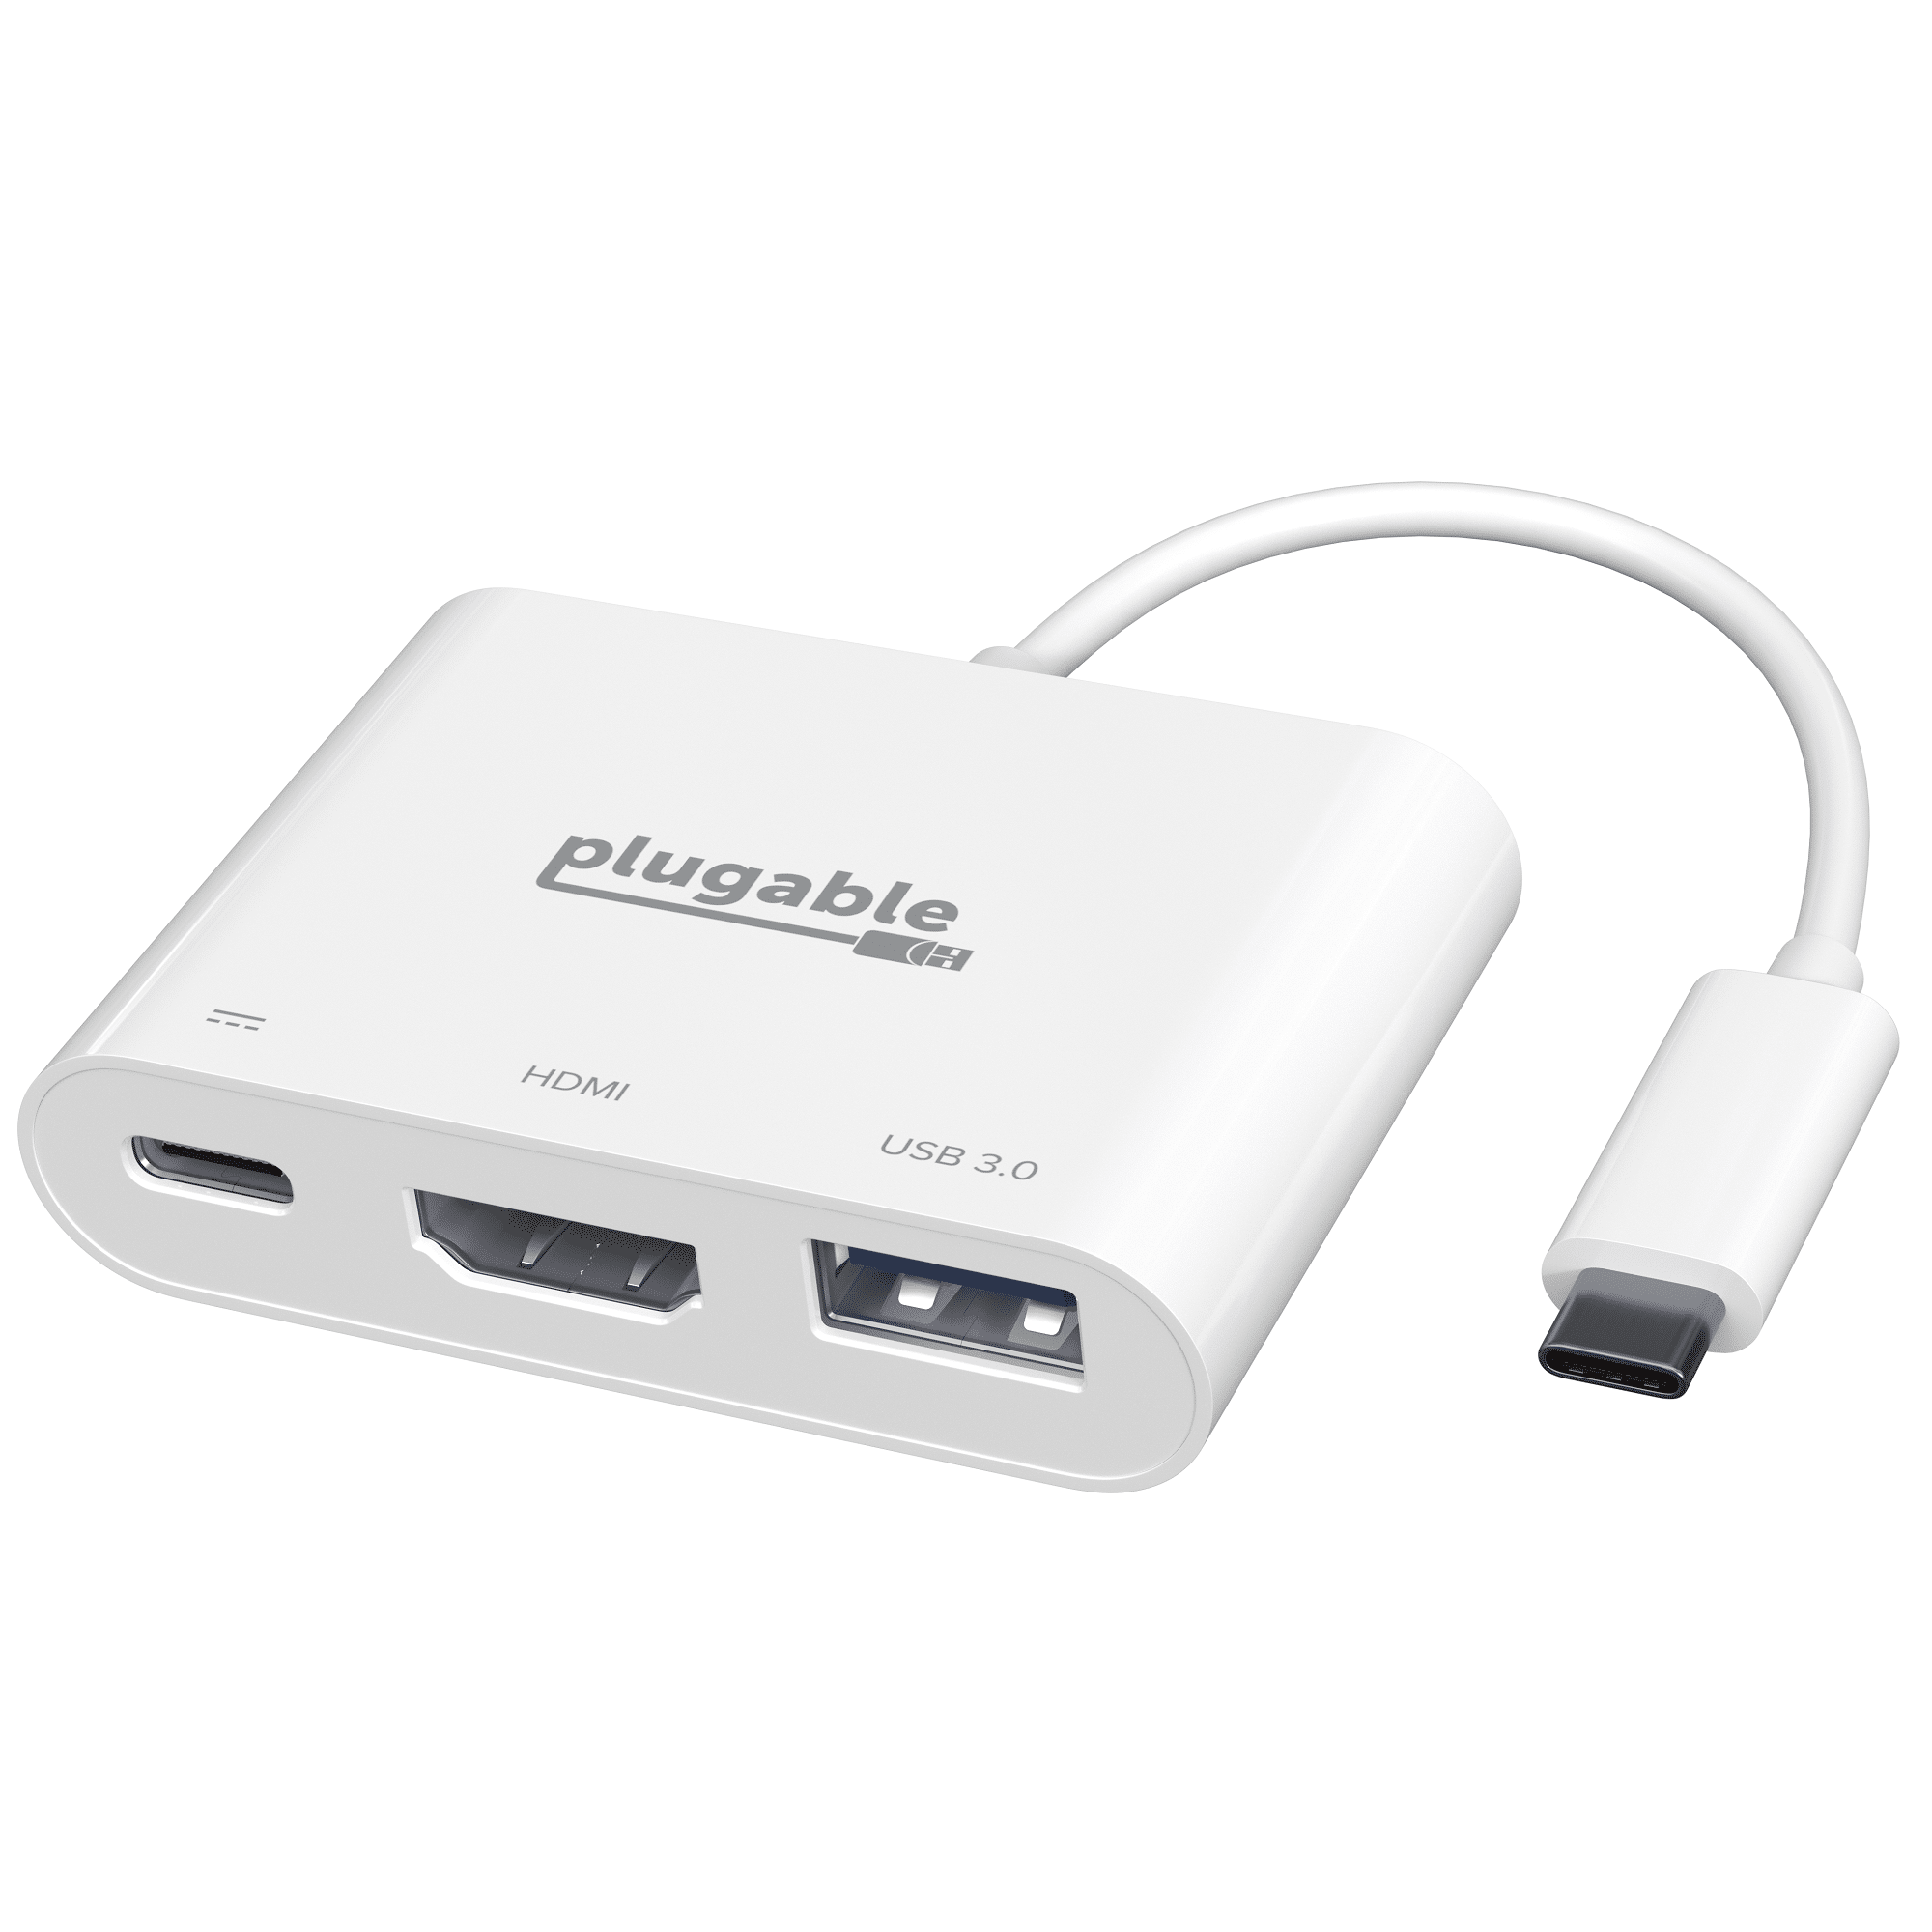 photo of Plugable launches affordable USBC-MD103 USB-C Multiport Adapter for Windows 10, macOS, Linux, and iPad Pro image